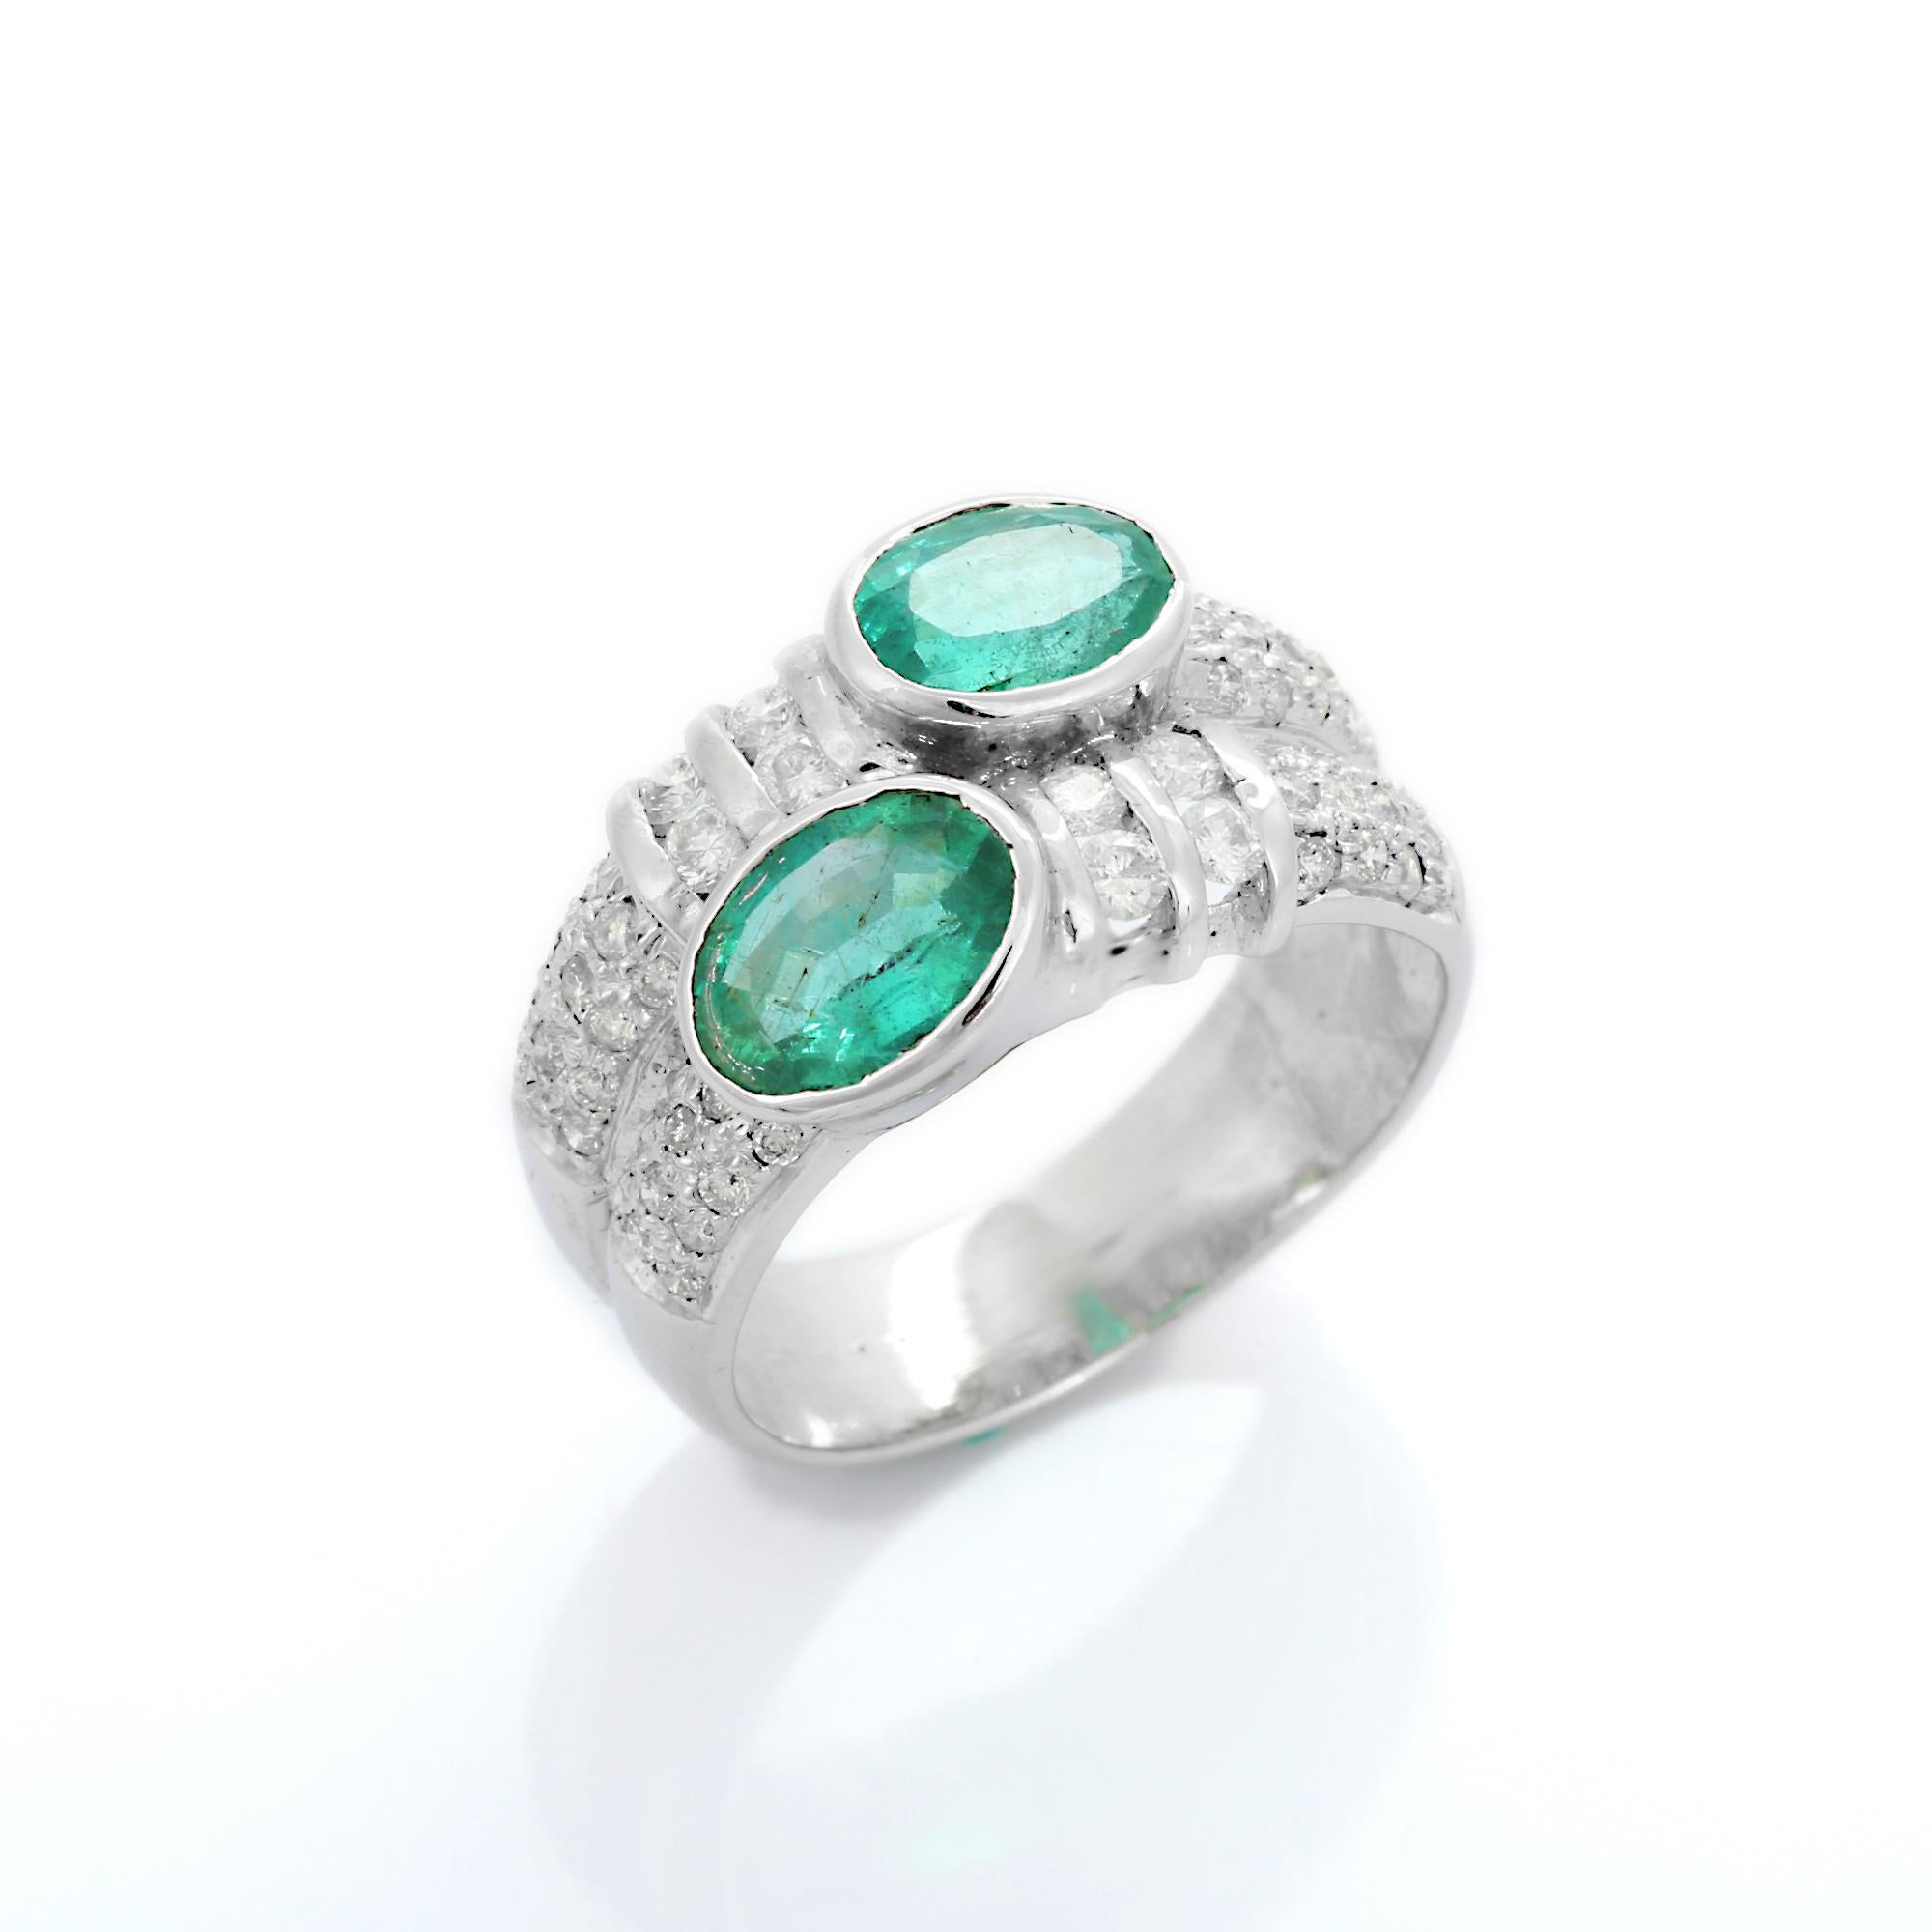 For Sale:  1.8 Carat Two Stone Emerald with Diamond Cocktail Ring in 18 Karat White Gold 7